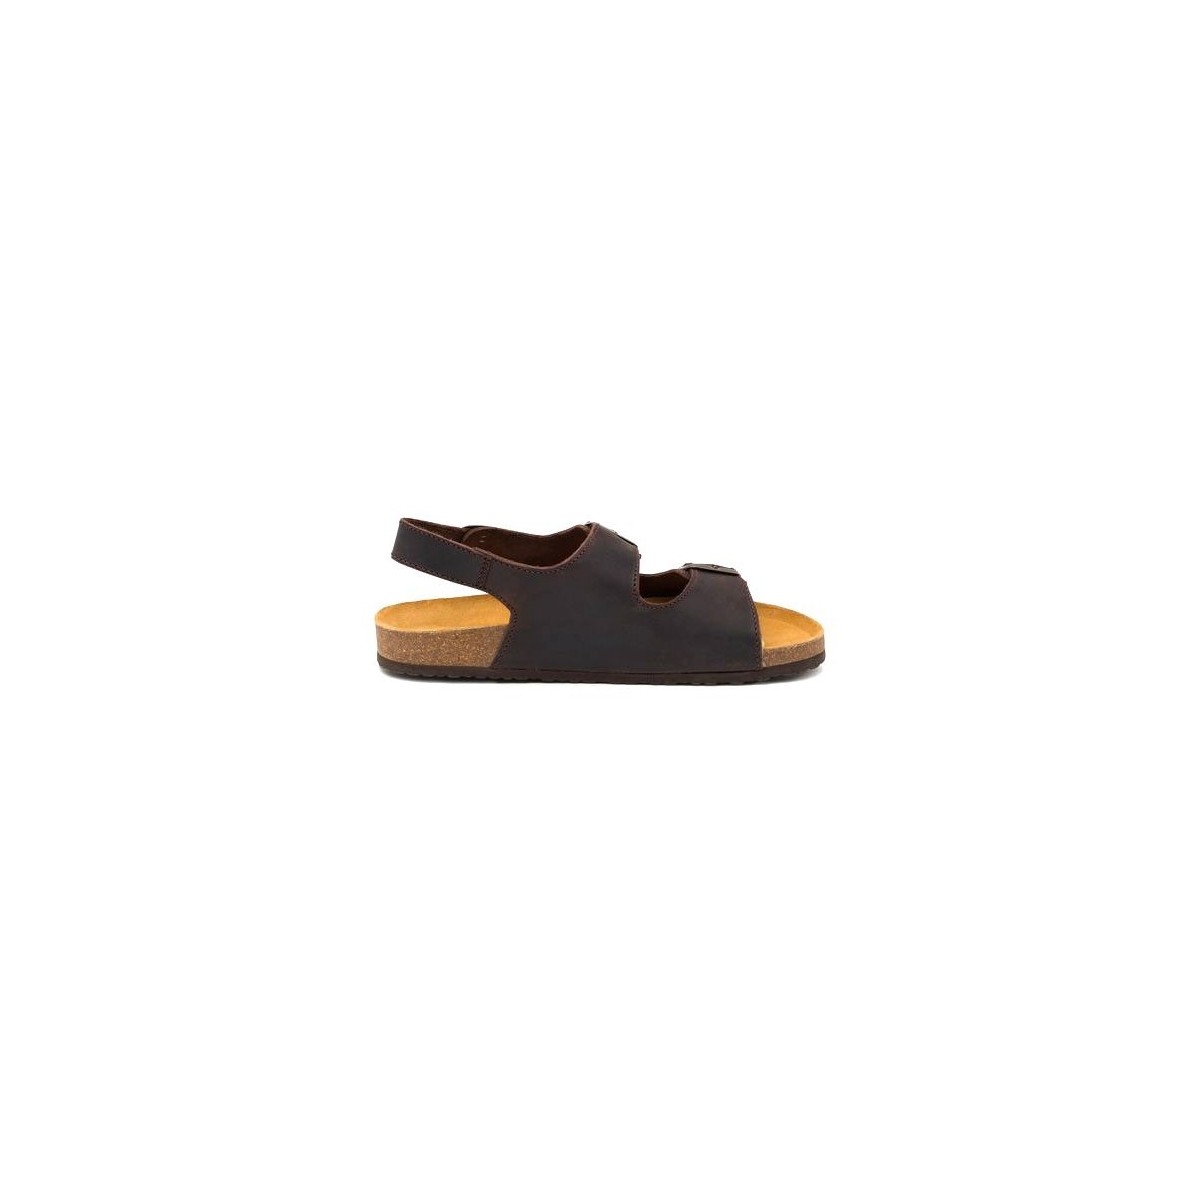 Bio men's brown leather sandals by Casual